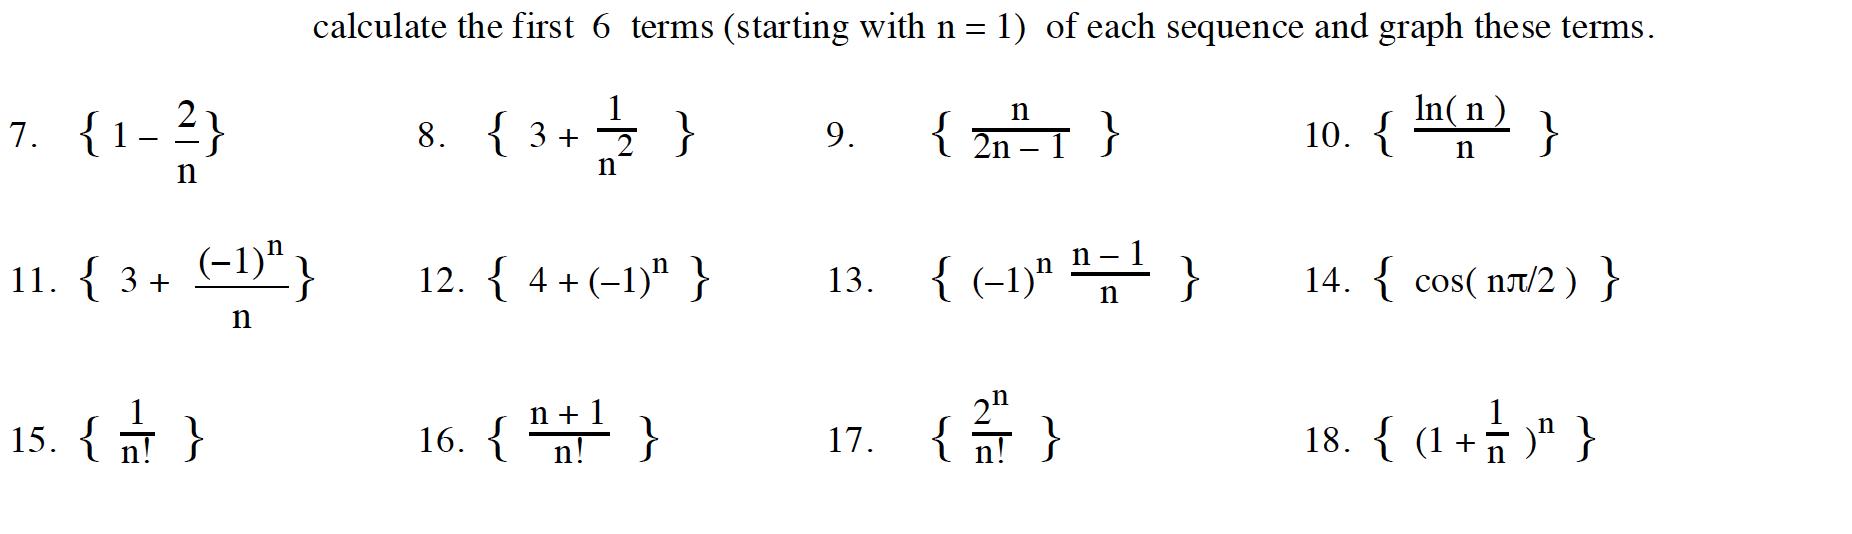 7. {1-2} n calculate the first 6 terms (starting with n = 1) of each sequence and graph these terms. In(n) {